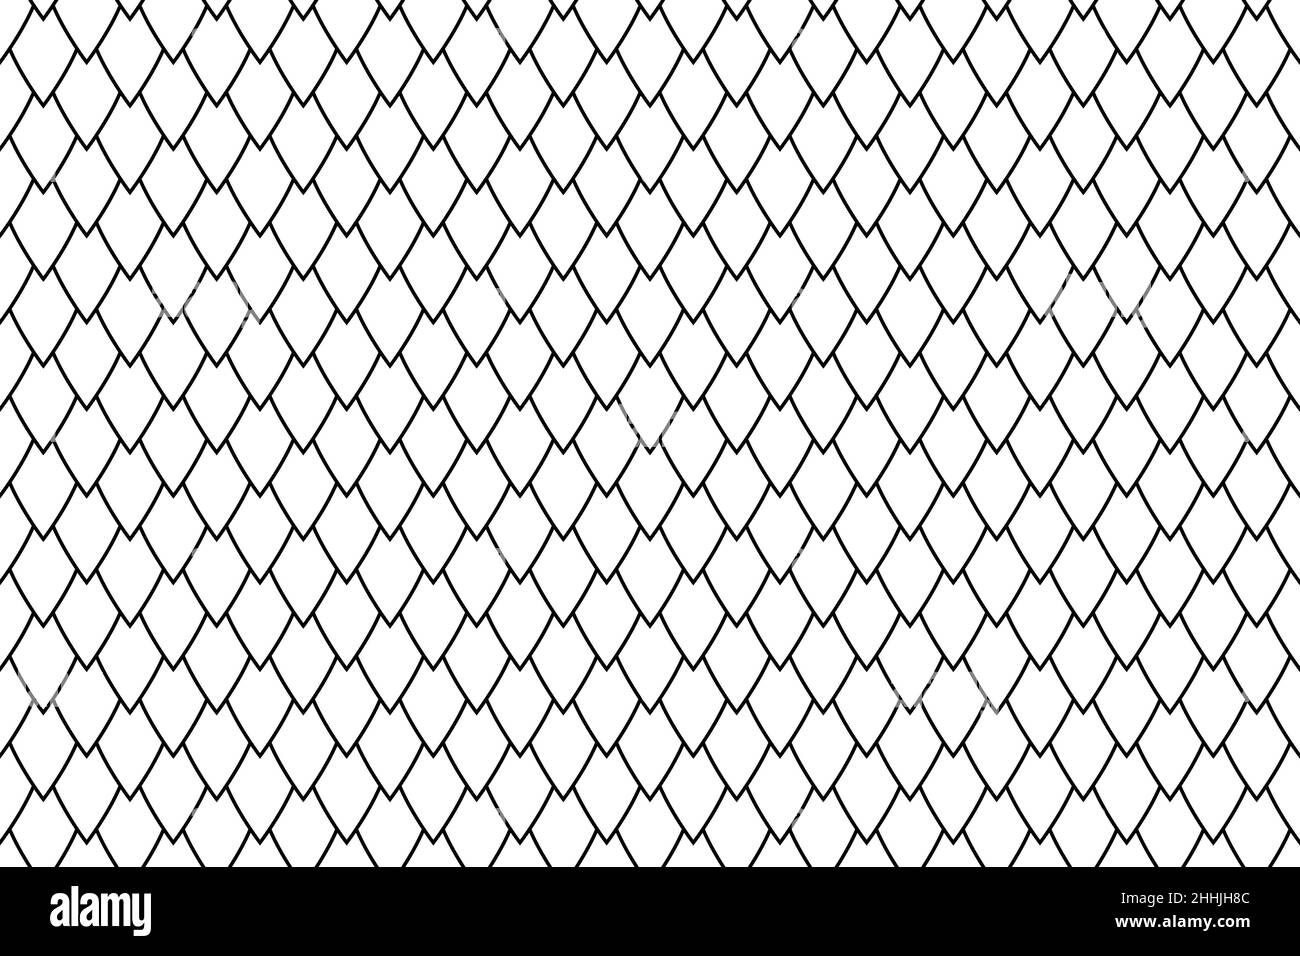 Dragon squama geometric simple seamless pattern. Black and white background or roof texture. Minimal wallpaper. Reptile decorative skin or mermaid tai Stock Vector